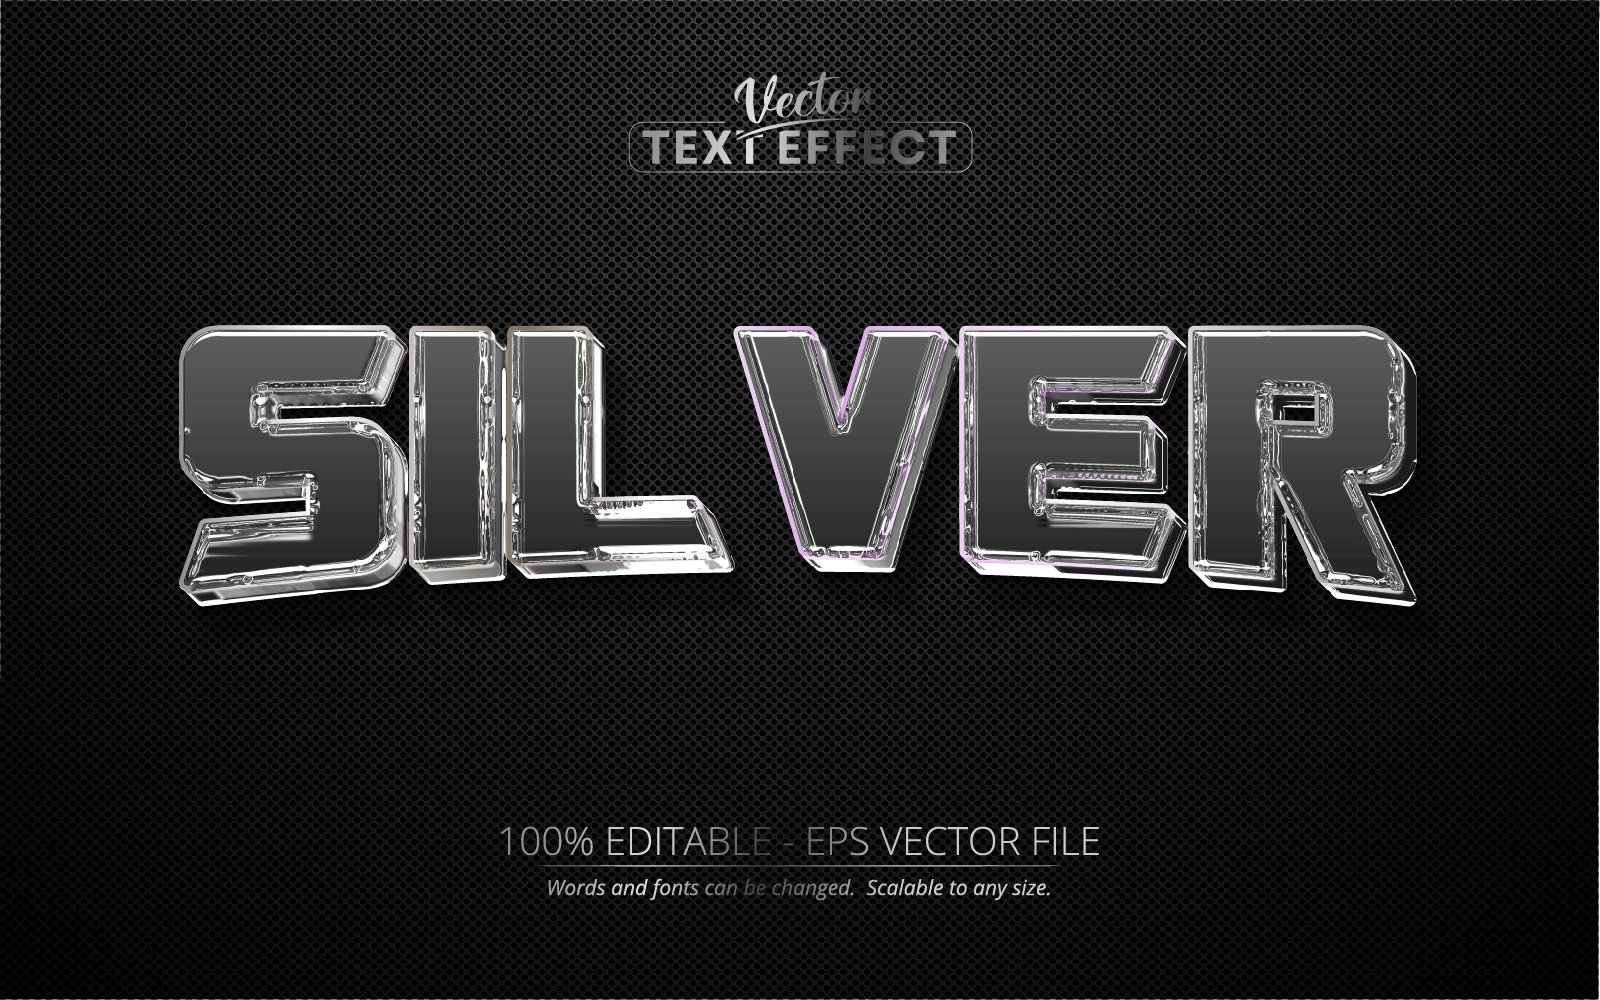 Silver - Editable Text Effect, Silver Metallic Shiny Text Style, Graphics Illustration